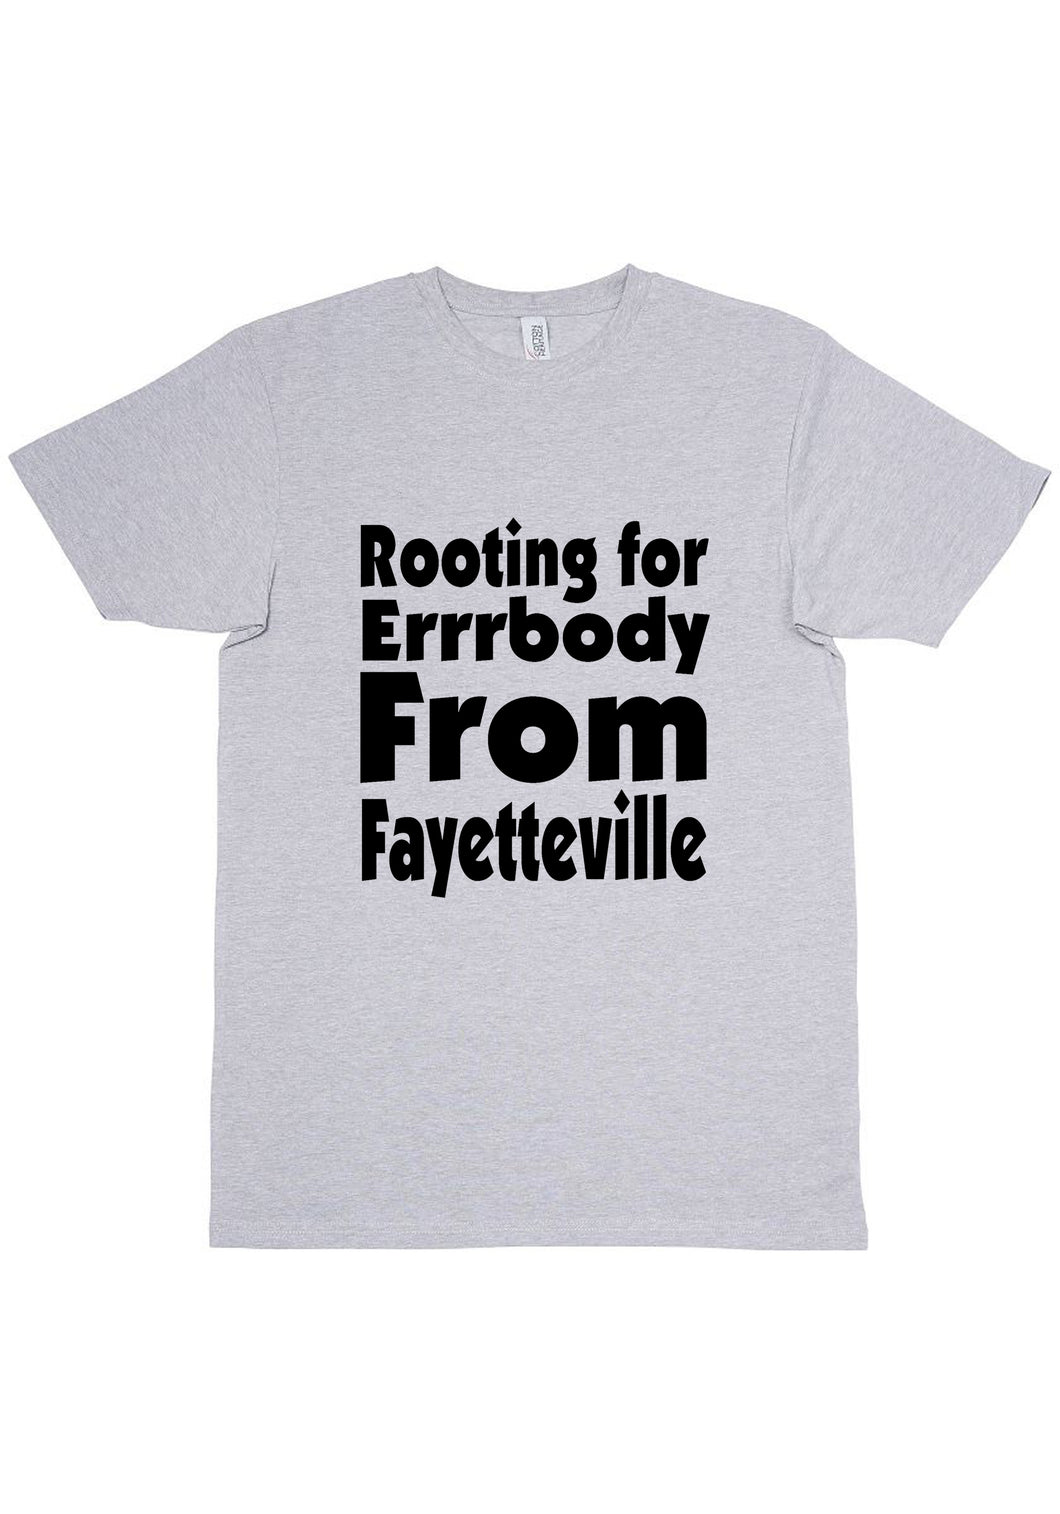 Rooting For Fayetteville T-Shirt